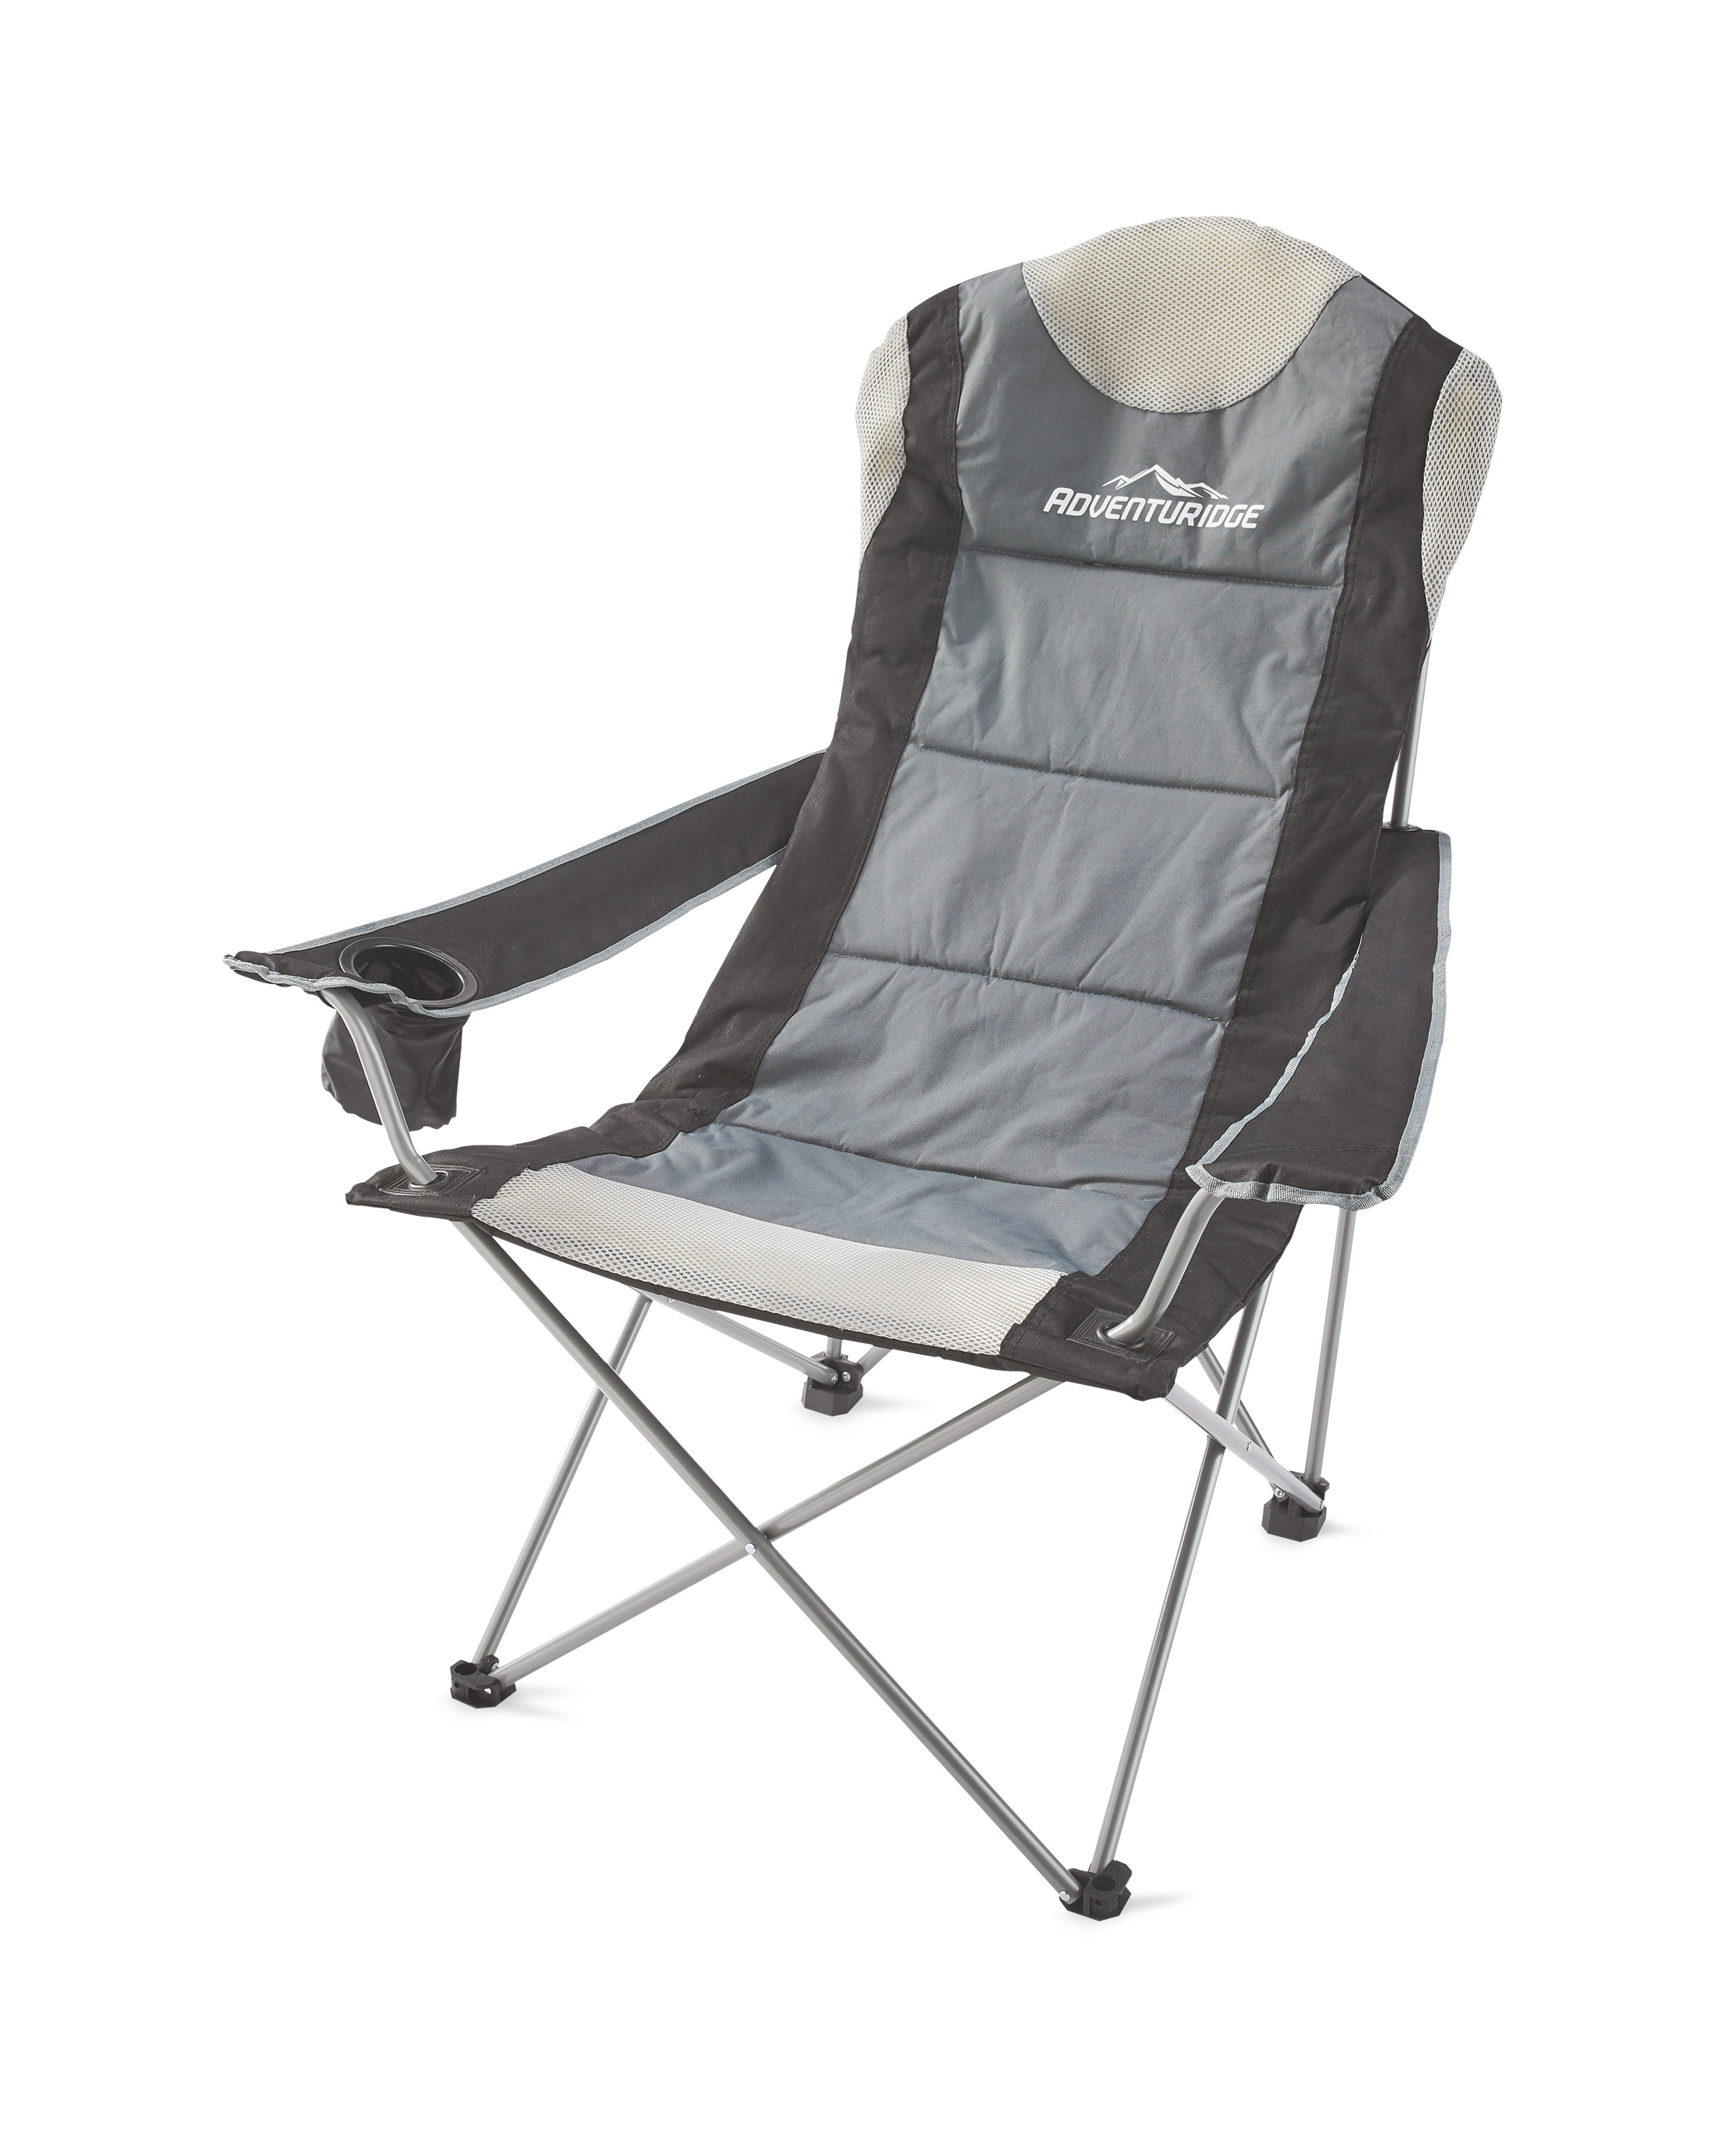 Black And Grey Camping Chair Aldi Uk